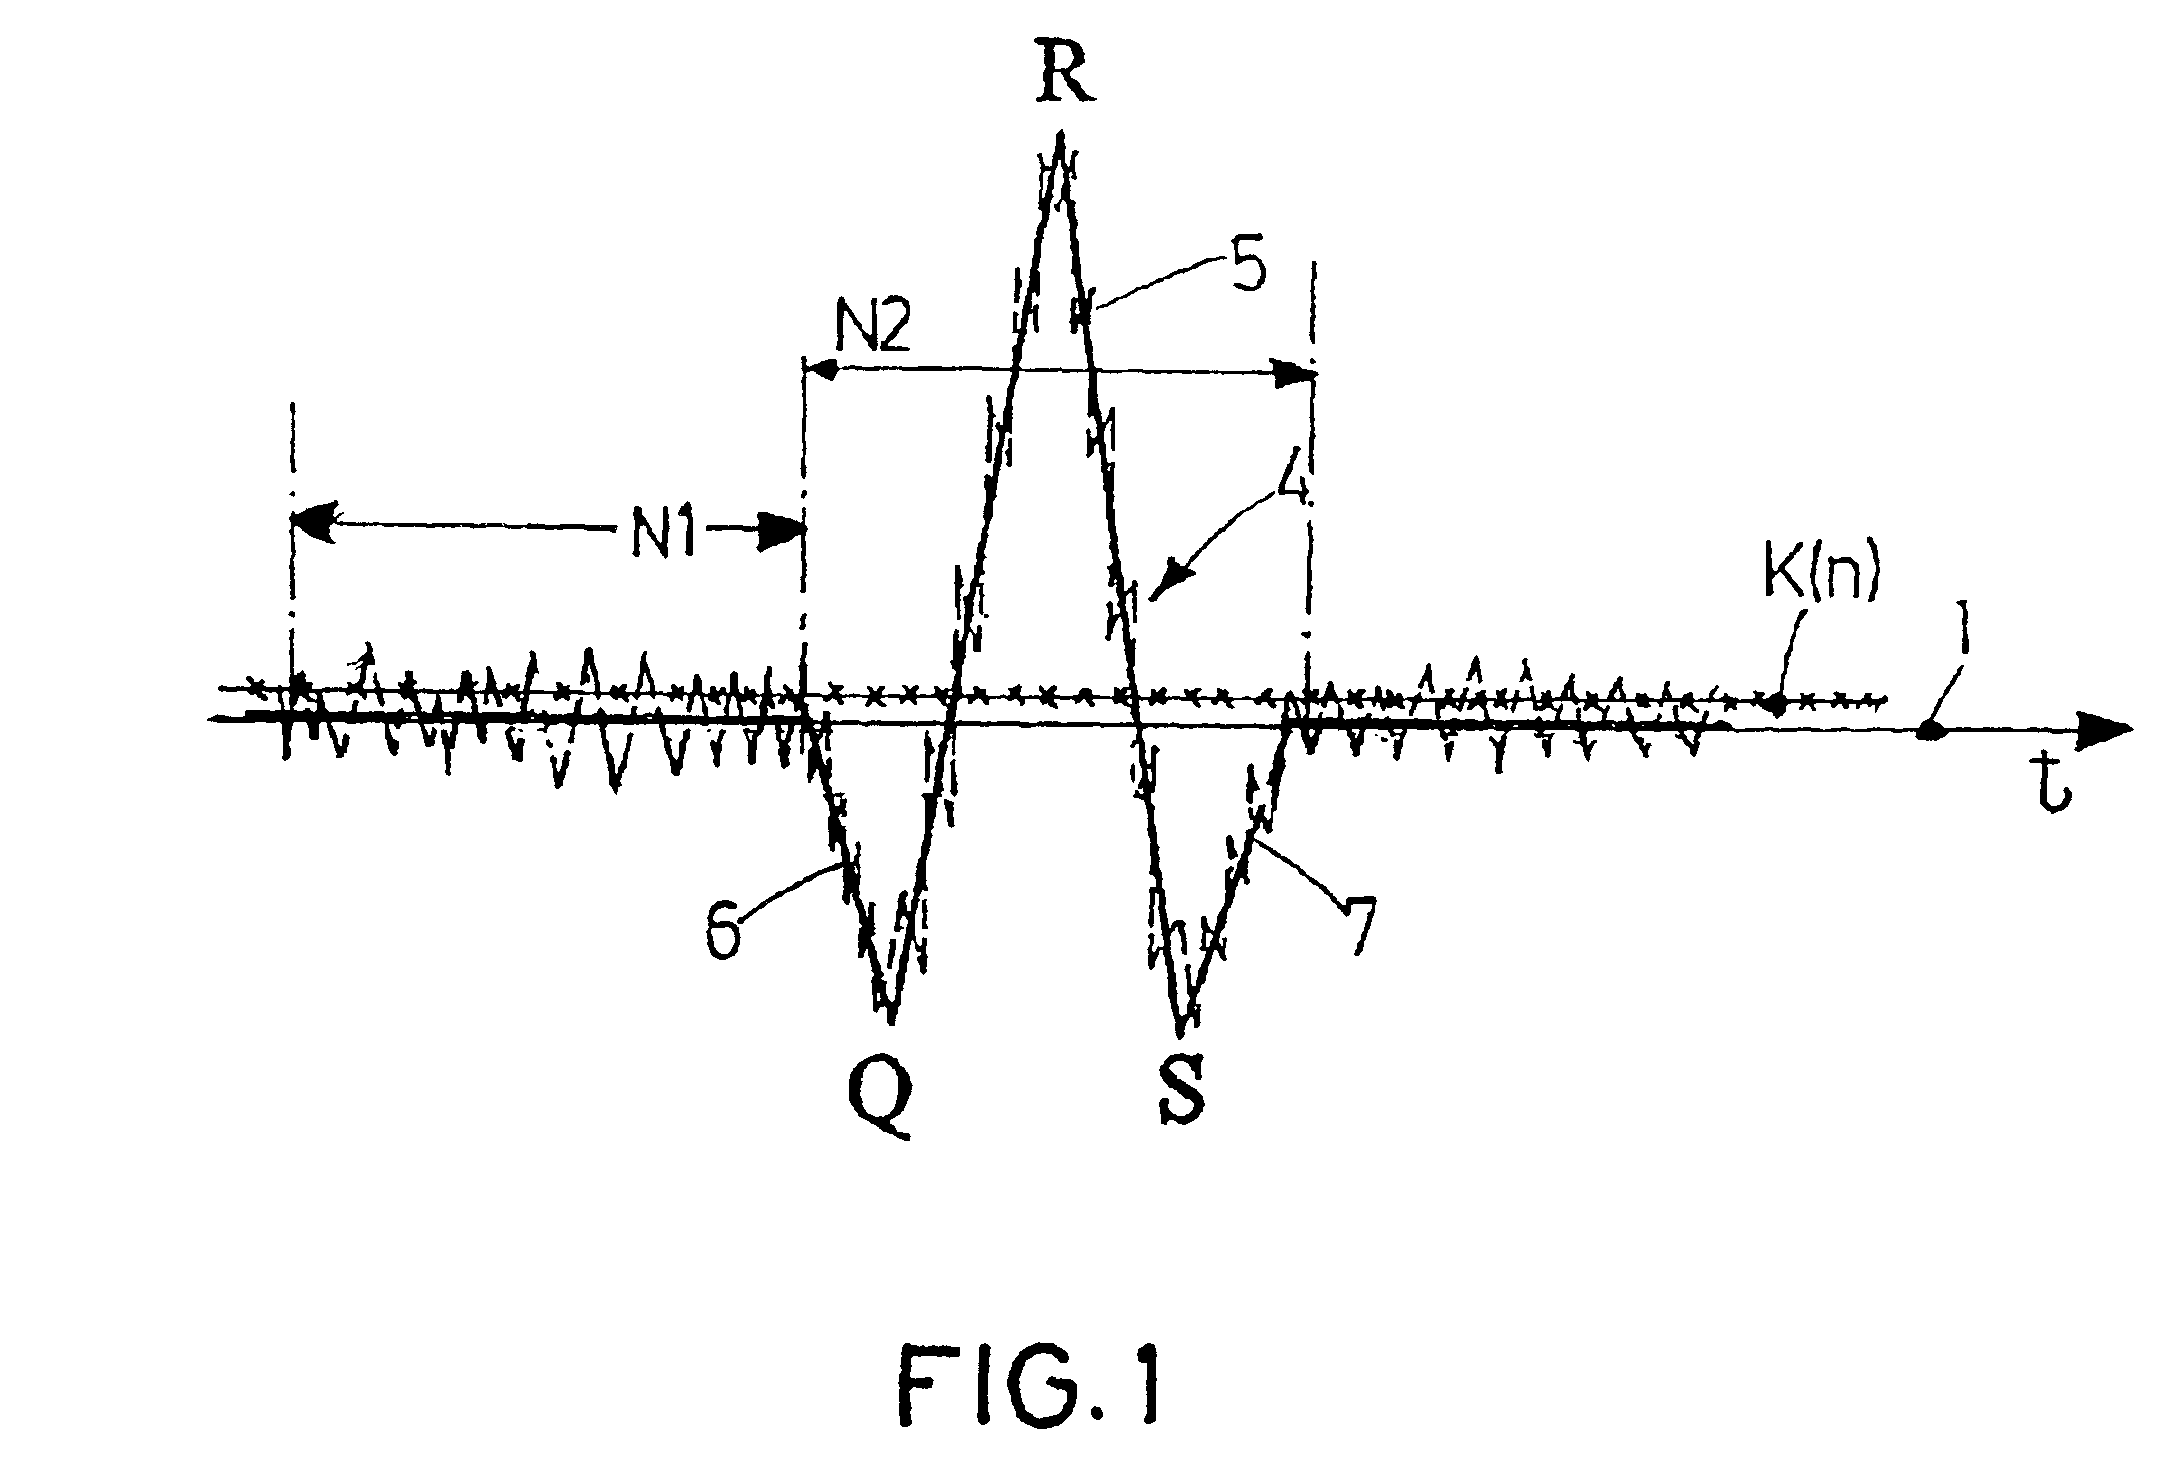 Signal evaluation method for detecting QRS complexes in electrocardiogram signals